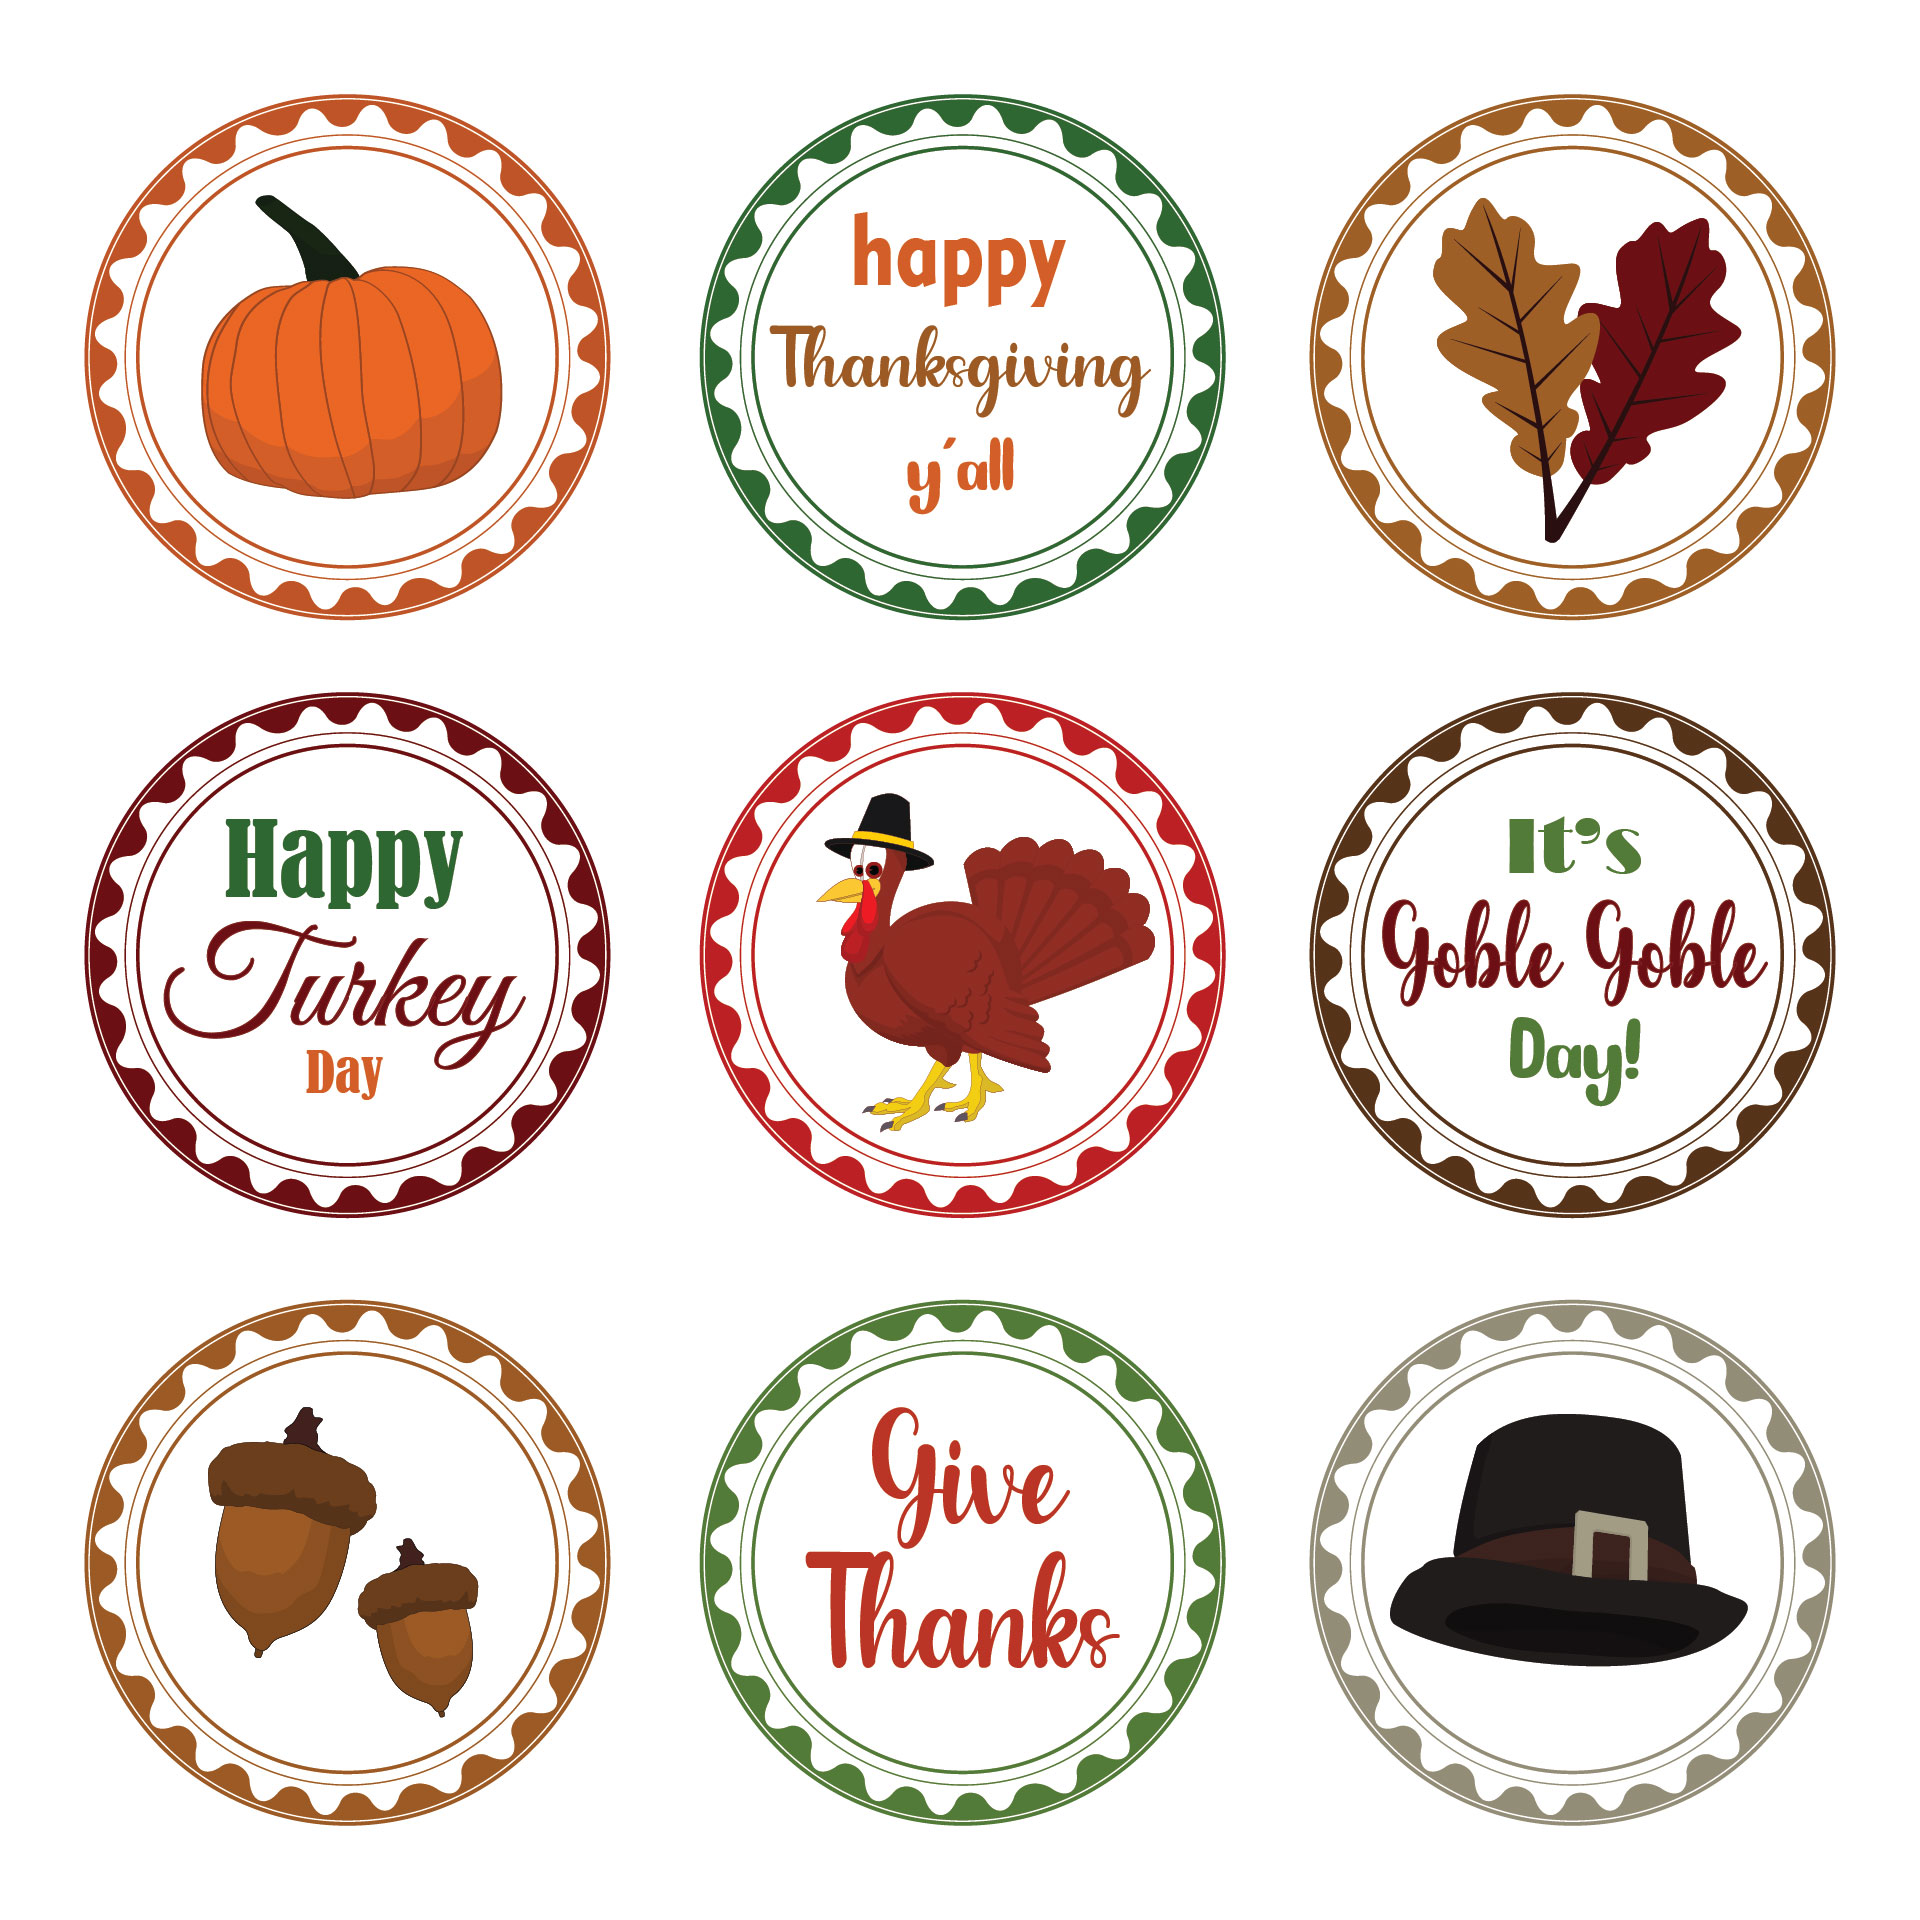 7-best-images-of-happy-thanksgiving-free-printable-tags-happy